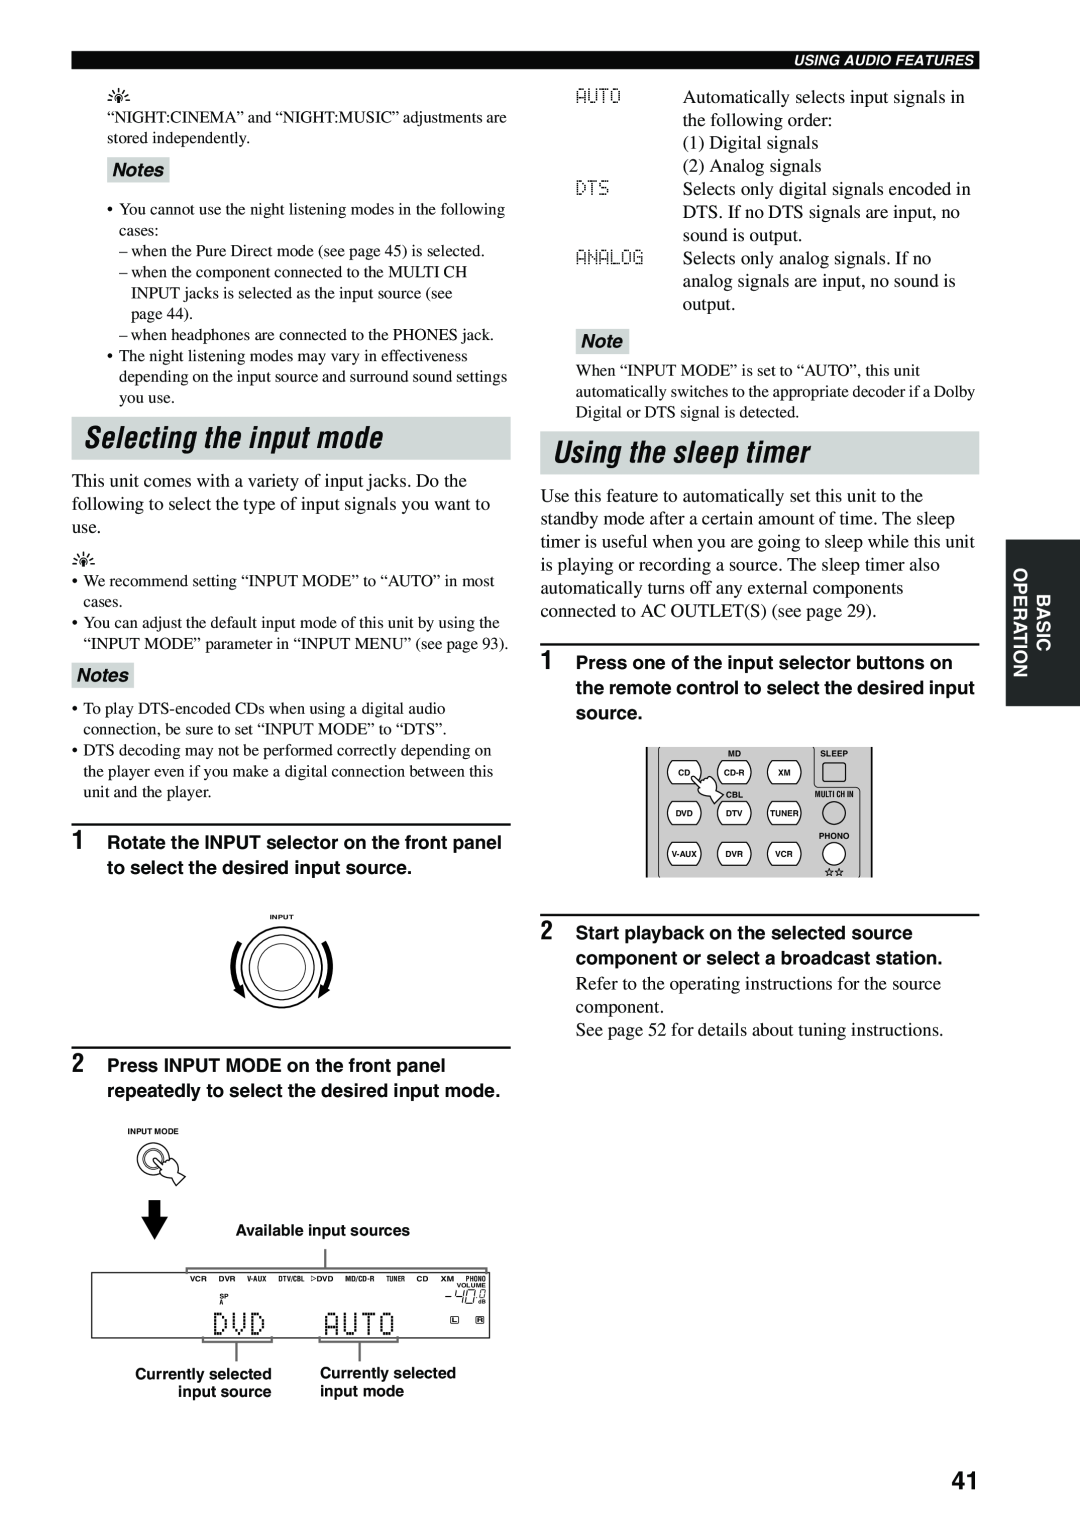 Yamaha HTR-5960 owner manual Selecting the input mode, Using the sleep timer, Auto, Notes 